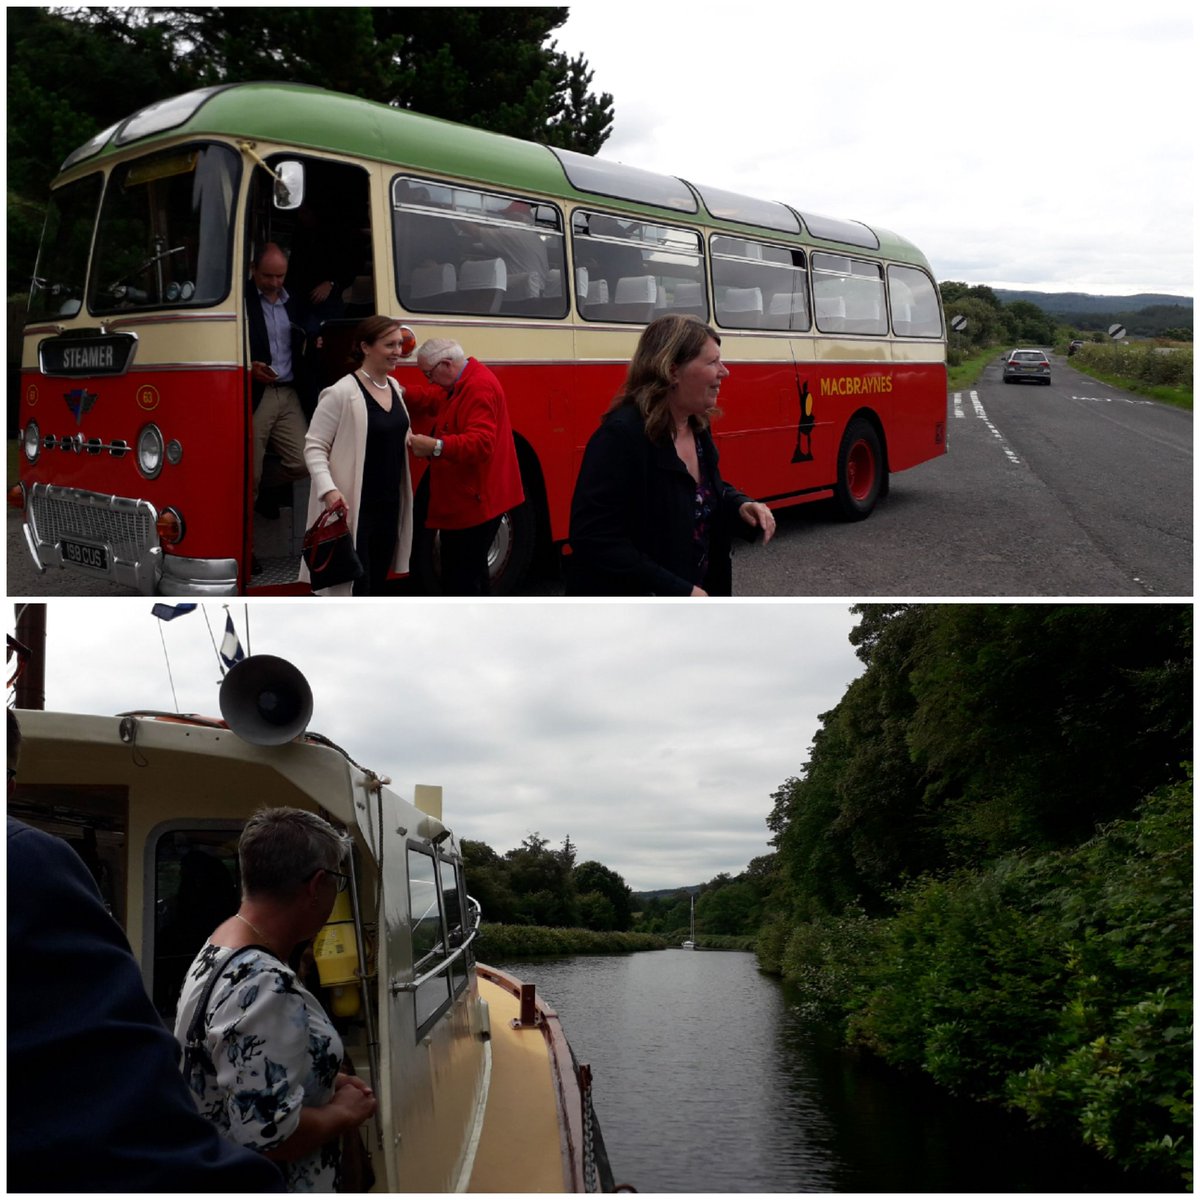 A lovely way to experience the #CrinanCanal at the launch of #ArdrishaigHarbour & the twinning with #DalslandKanal ahead of #YCW2020 with @scottishcanals @VisitScotland @scotgov